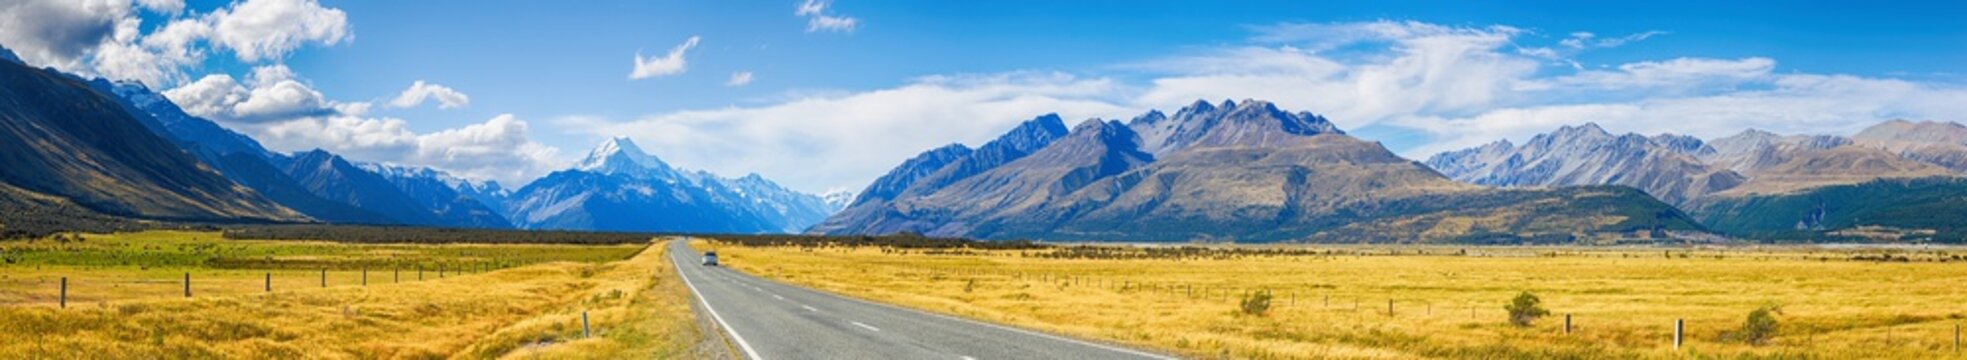 Picture panoramic view of car on the road go to Mt. Cook, New Zealand national park at South island new zealand	